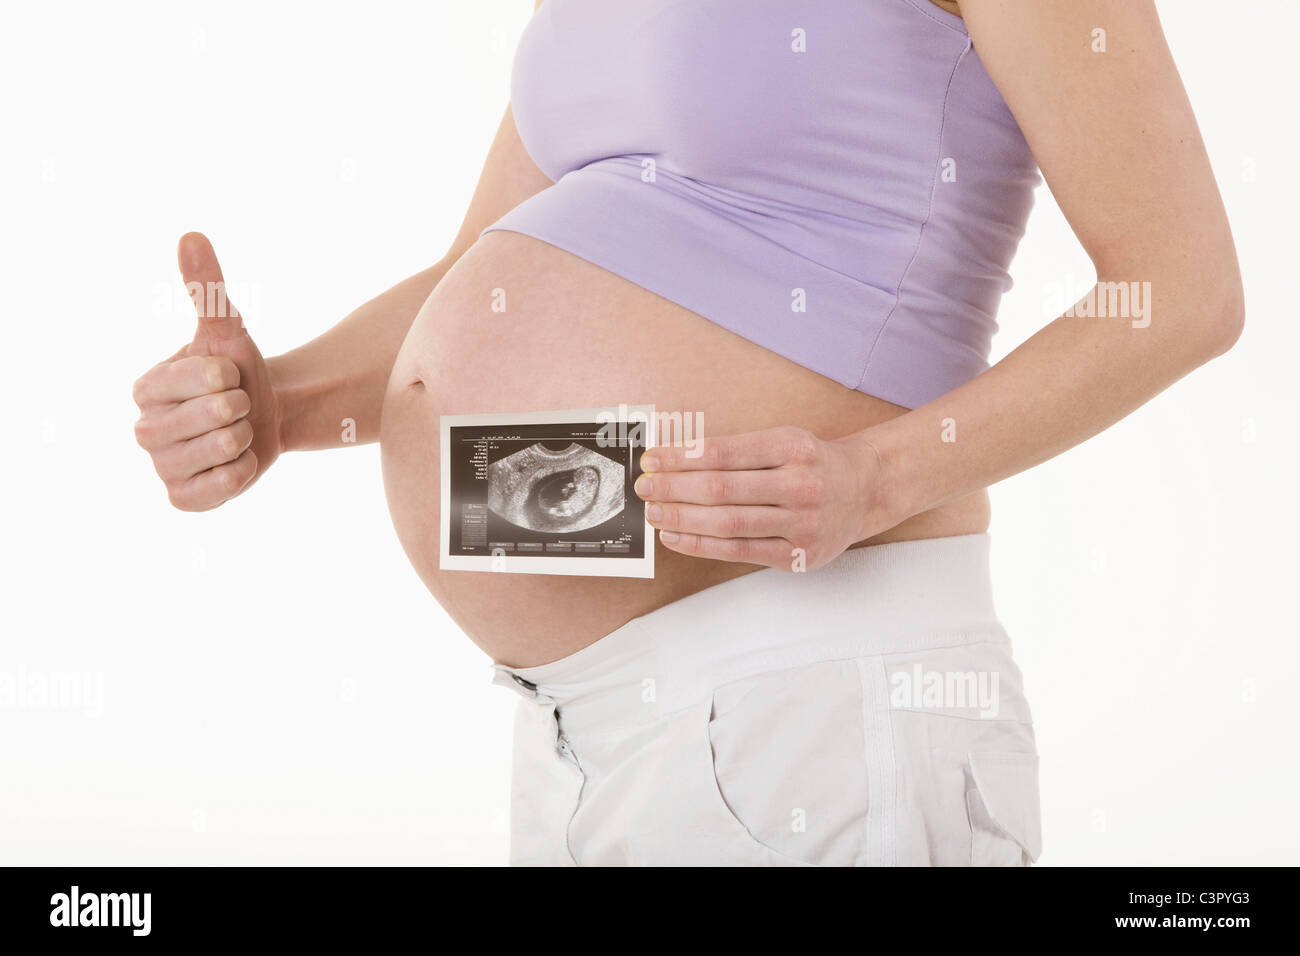 Pregnant woman holding sonogram image, showing Thumbs up sign, mid section Banque D'Images